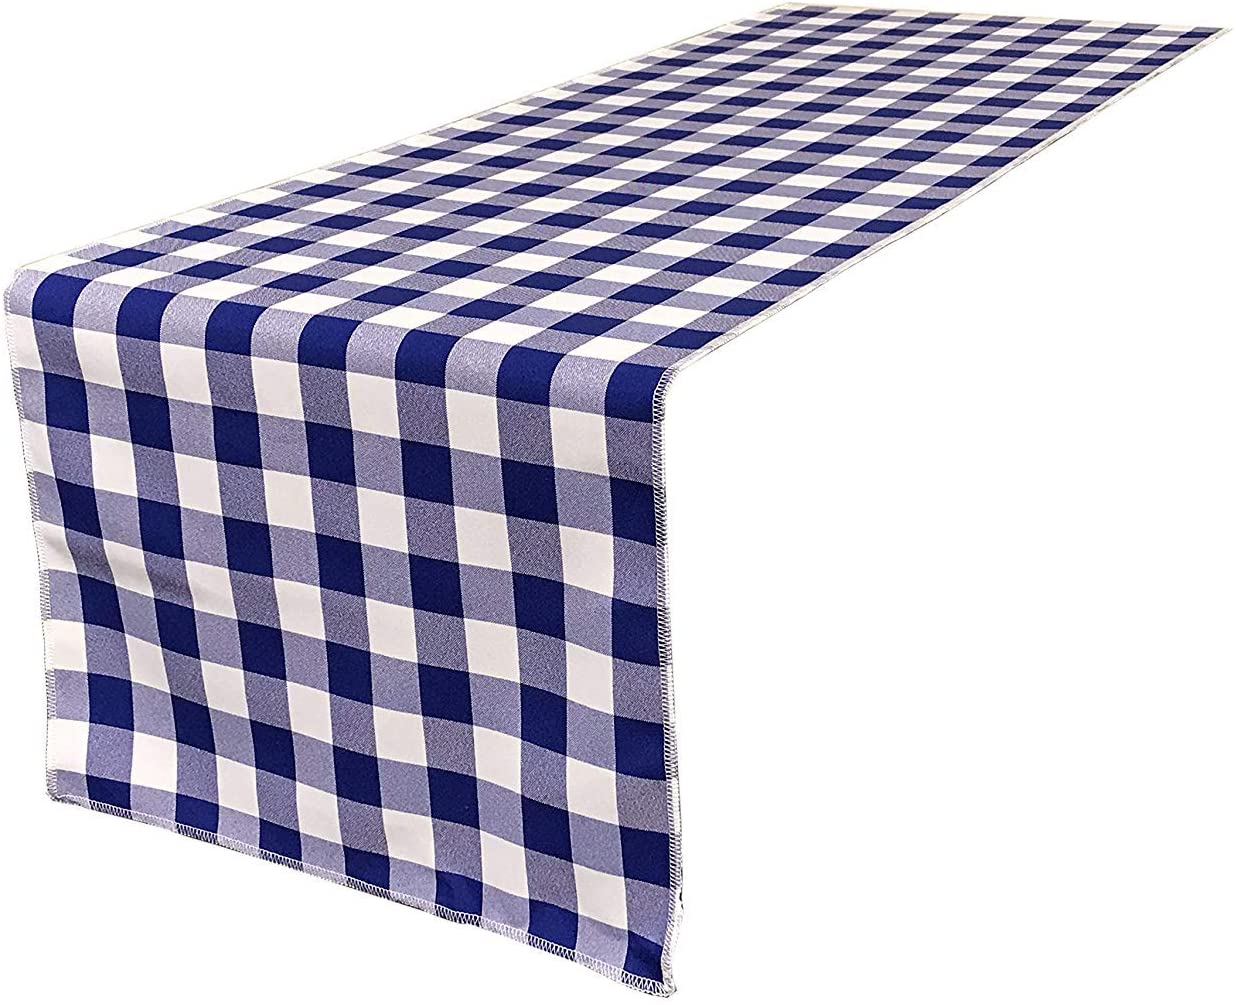 12" Wide by The Size of Your Choice, Polyester Poplin Gingham, Checkered, Plaid Table Runner (White & Royal Blue,